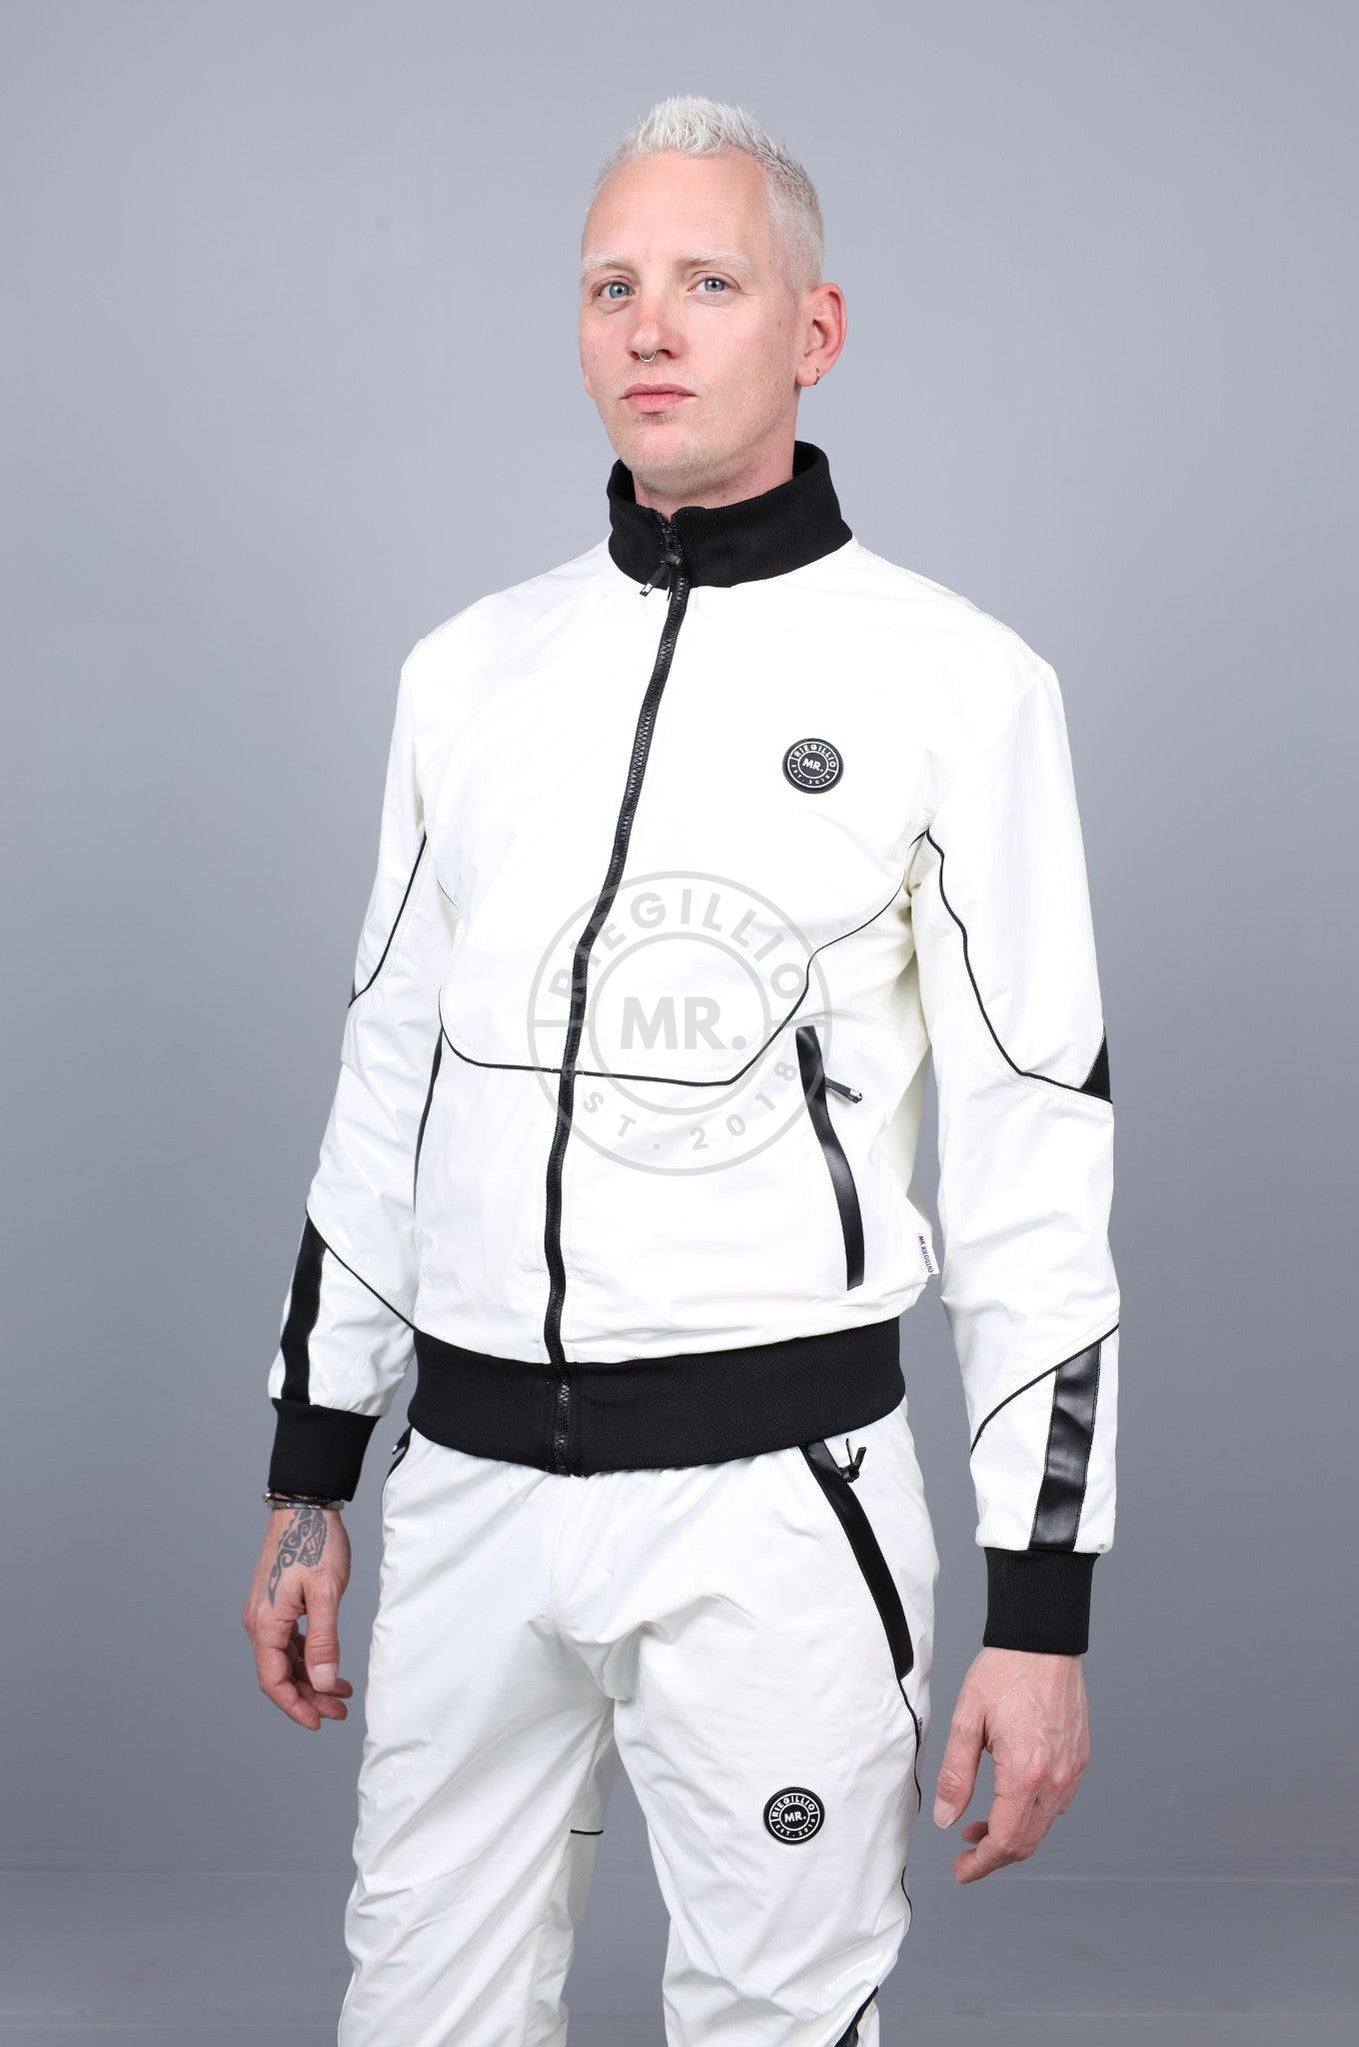 PVC 24 Tracksuit Jacket - White with Black Piping at MR. Riegillio